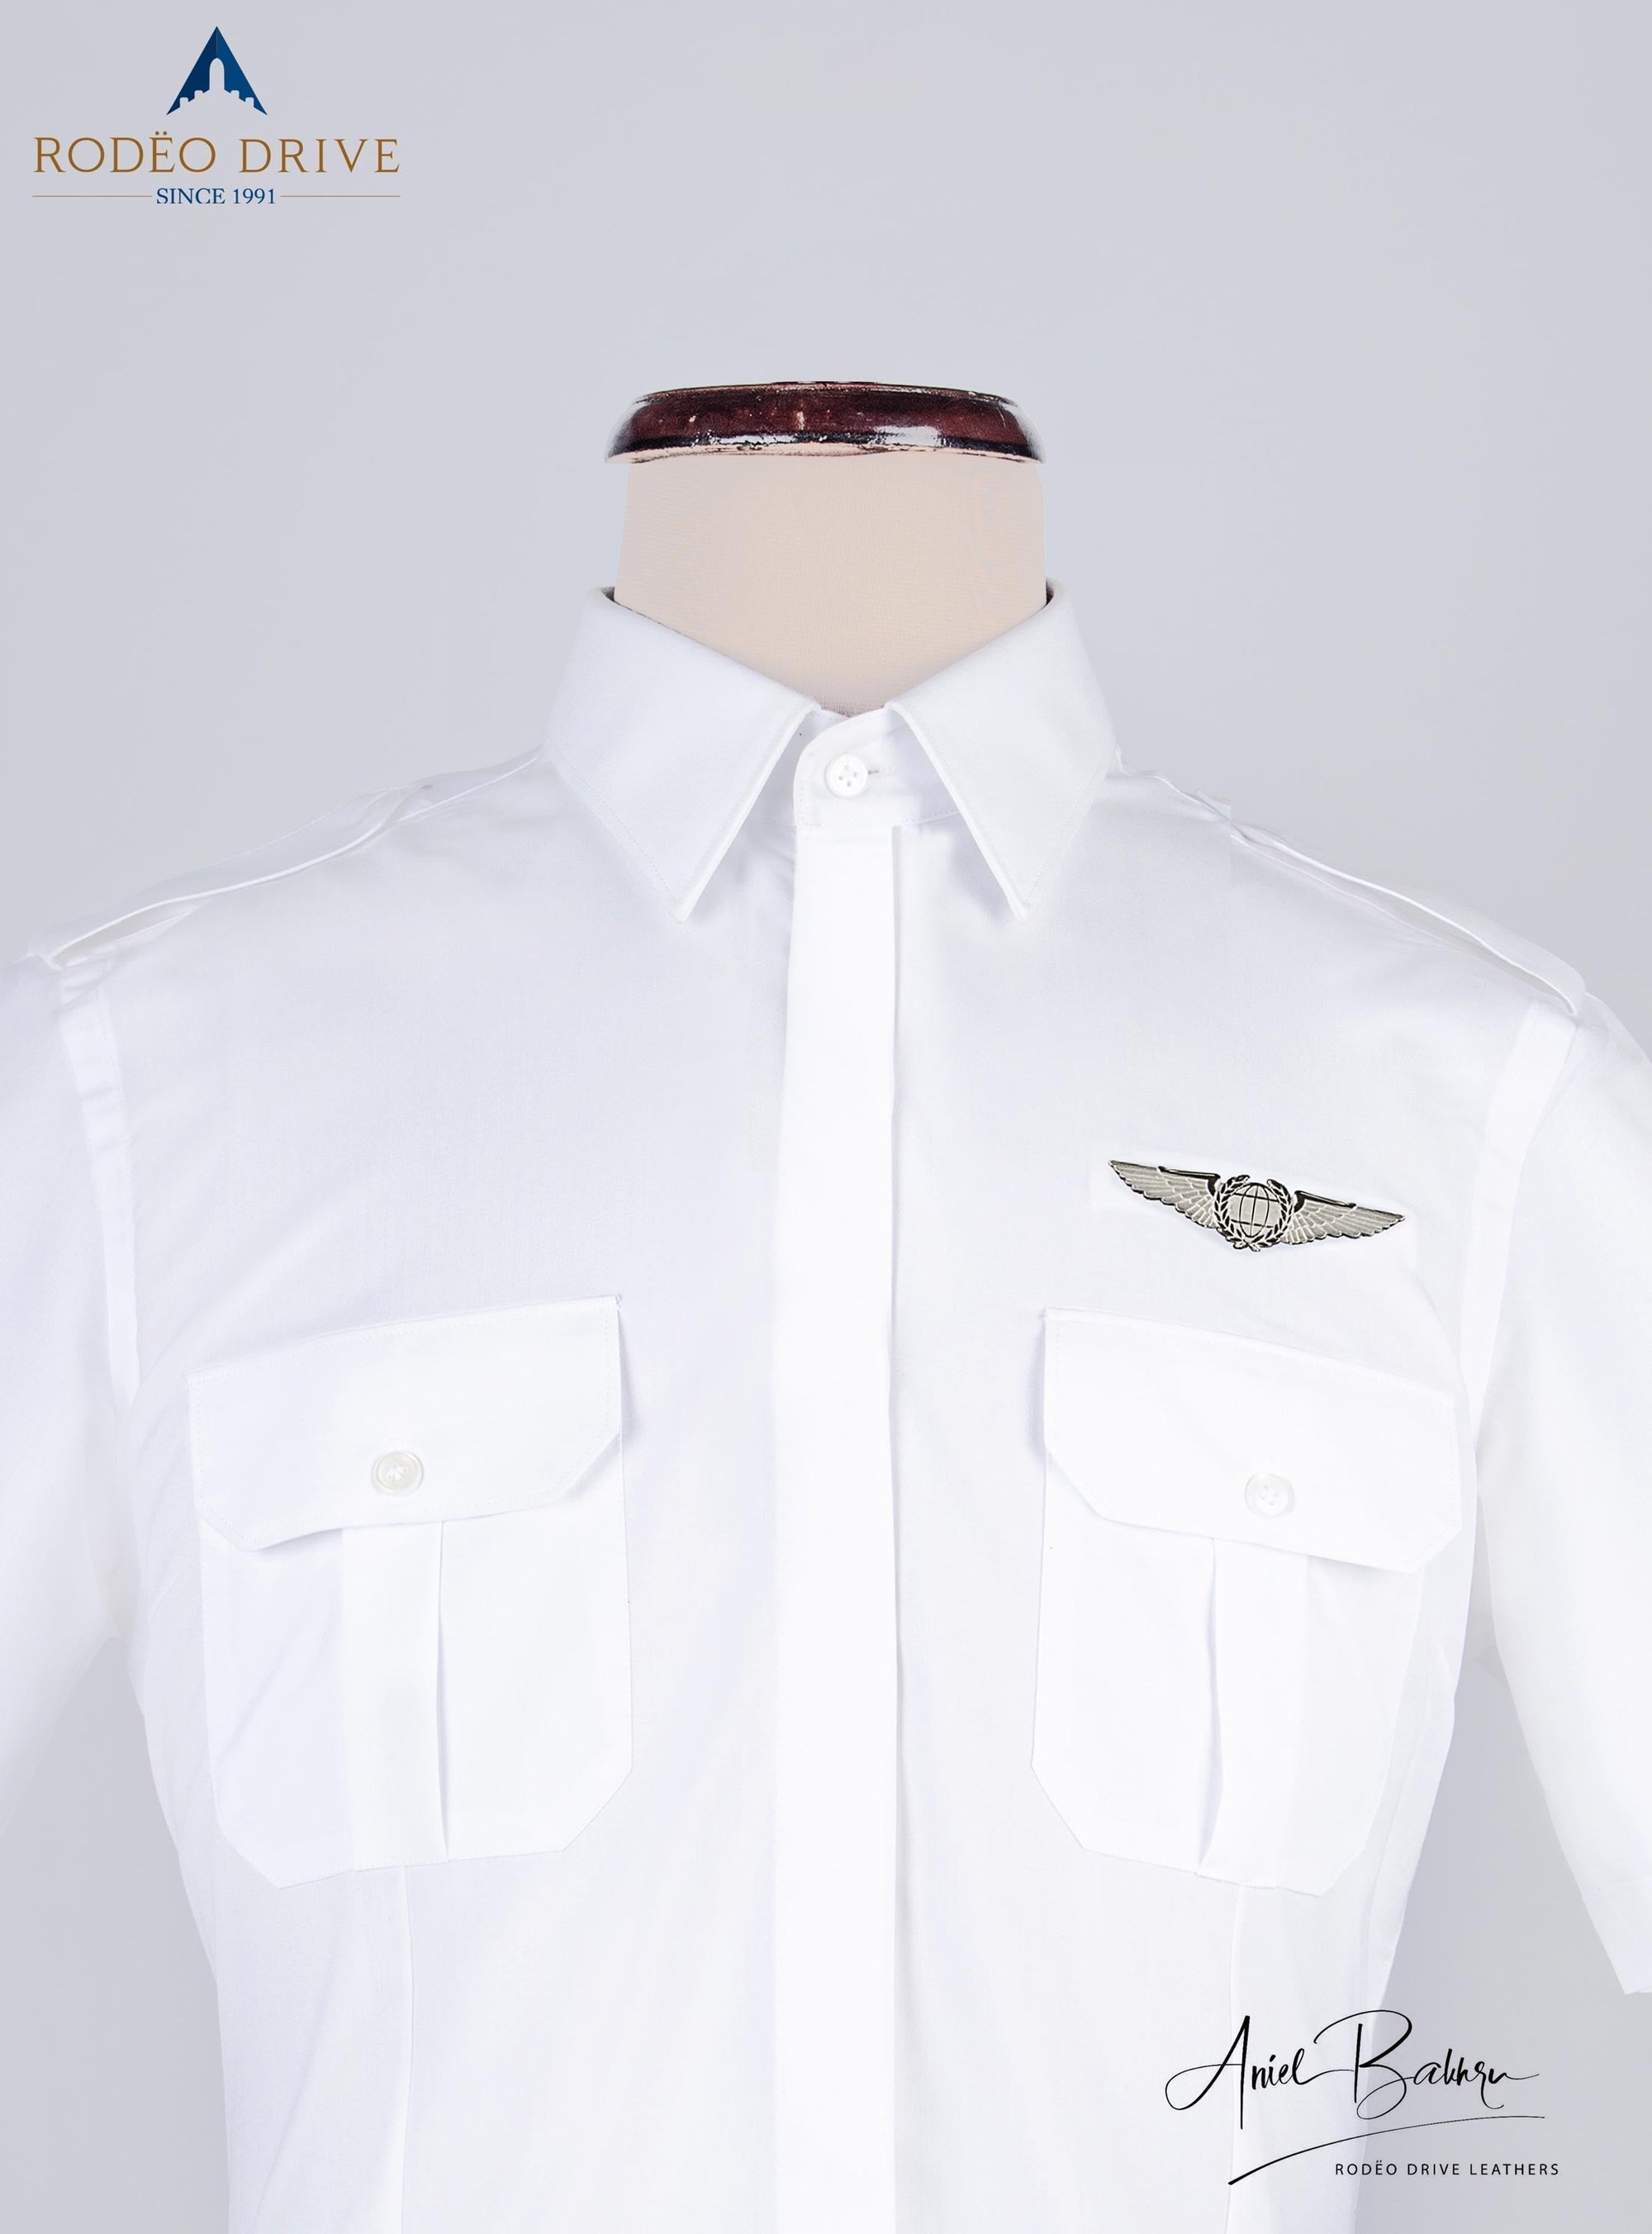 close front image of white Women's Pilot shirt. Two pockets with buttoned strap are visible.  The  shirt is buttoned and displayed on mannequin